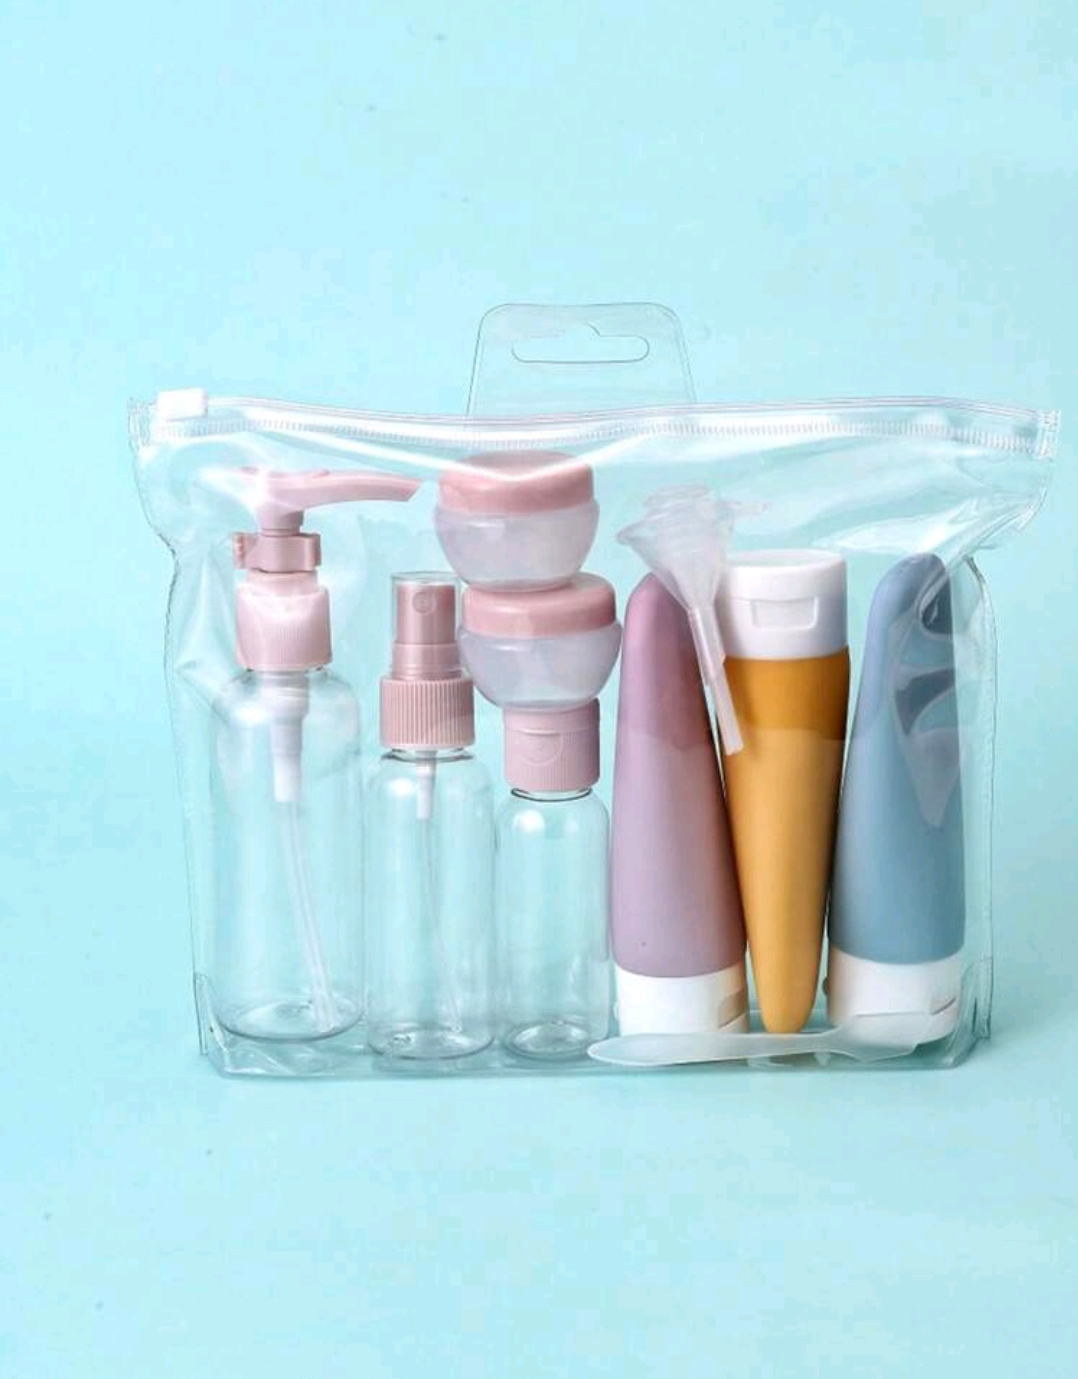 Travel Refillable Bottle Set Spray Lotion Shampoo Shower Gel Tube Bottling Cosmetic Empty Liquid Container Portable Tool Refill